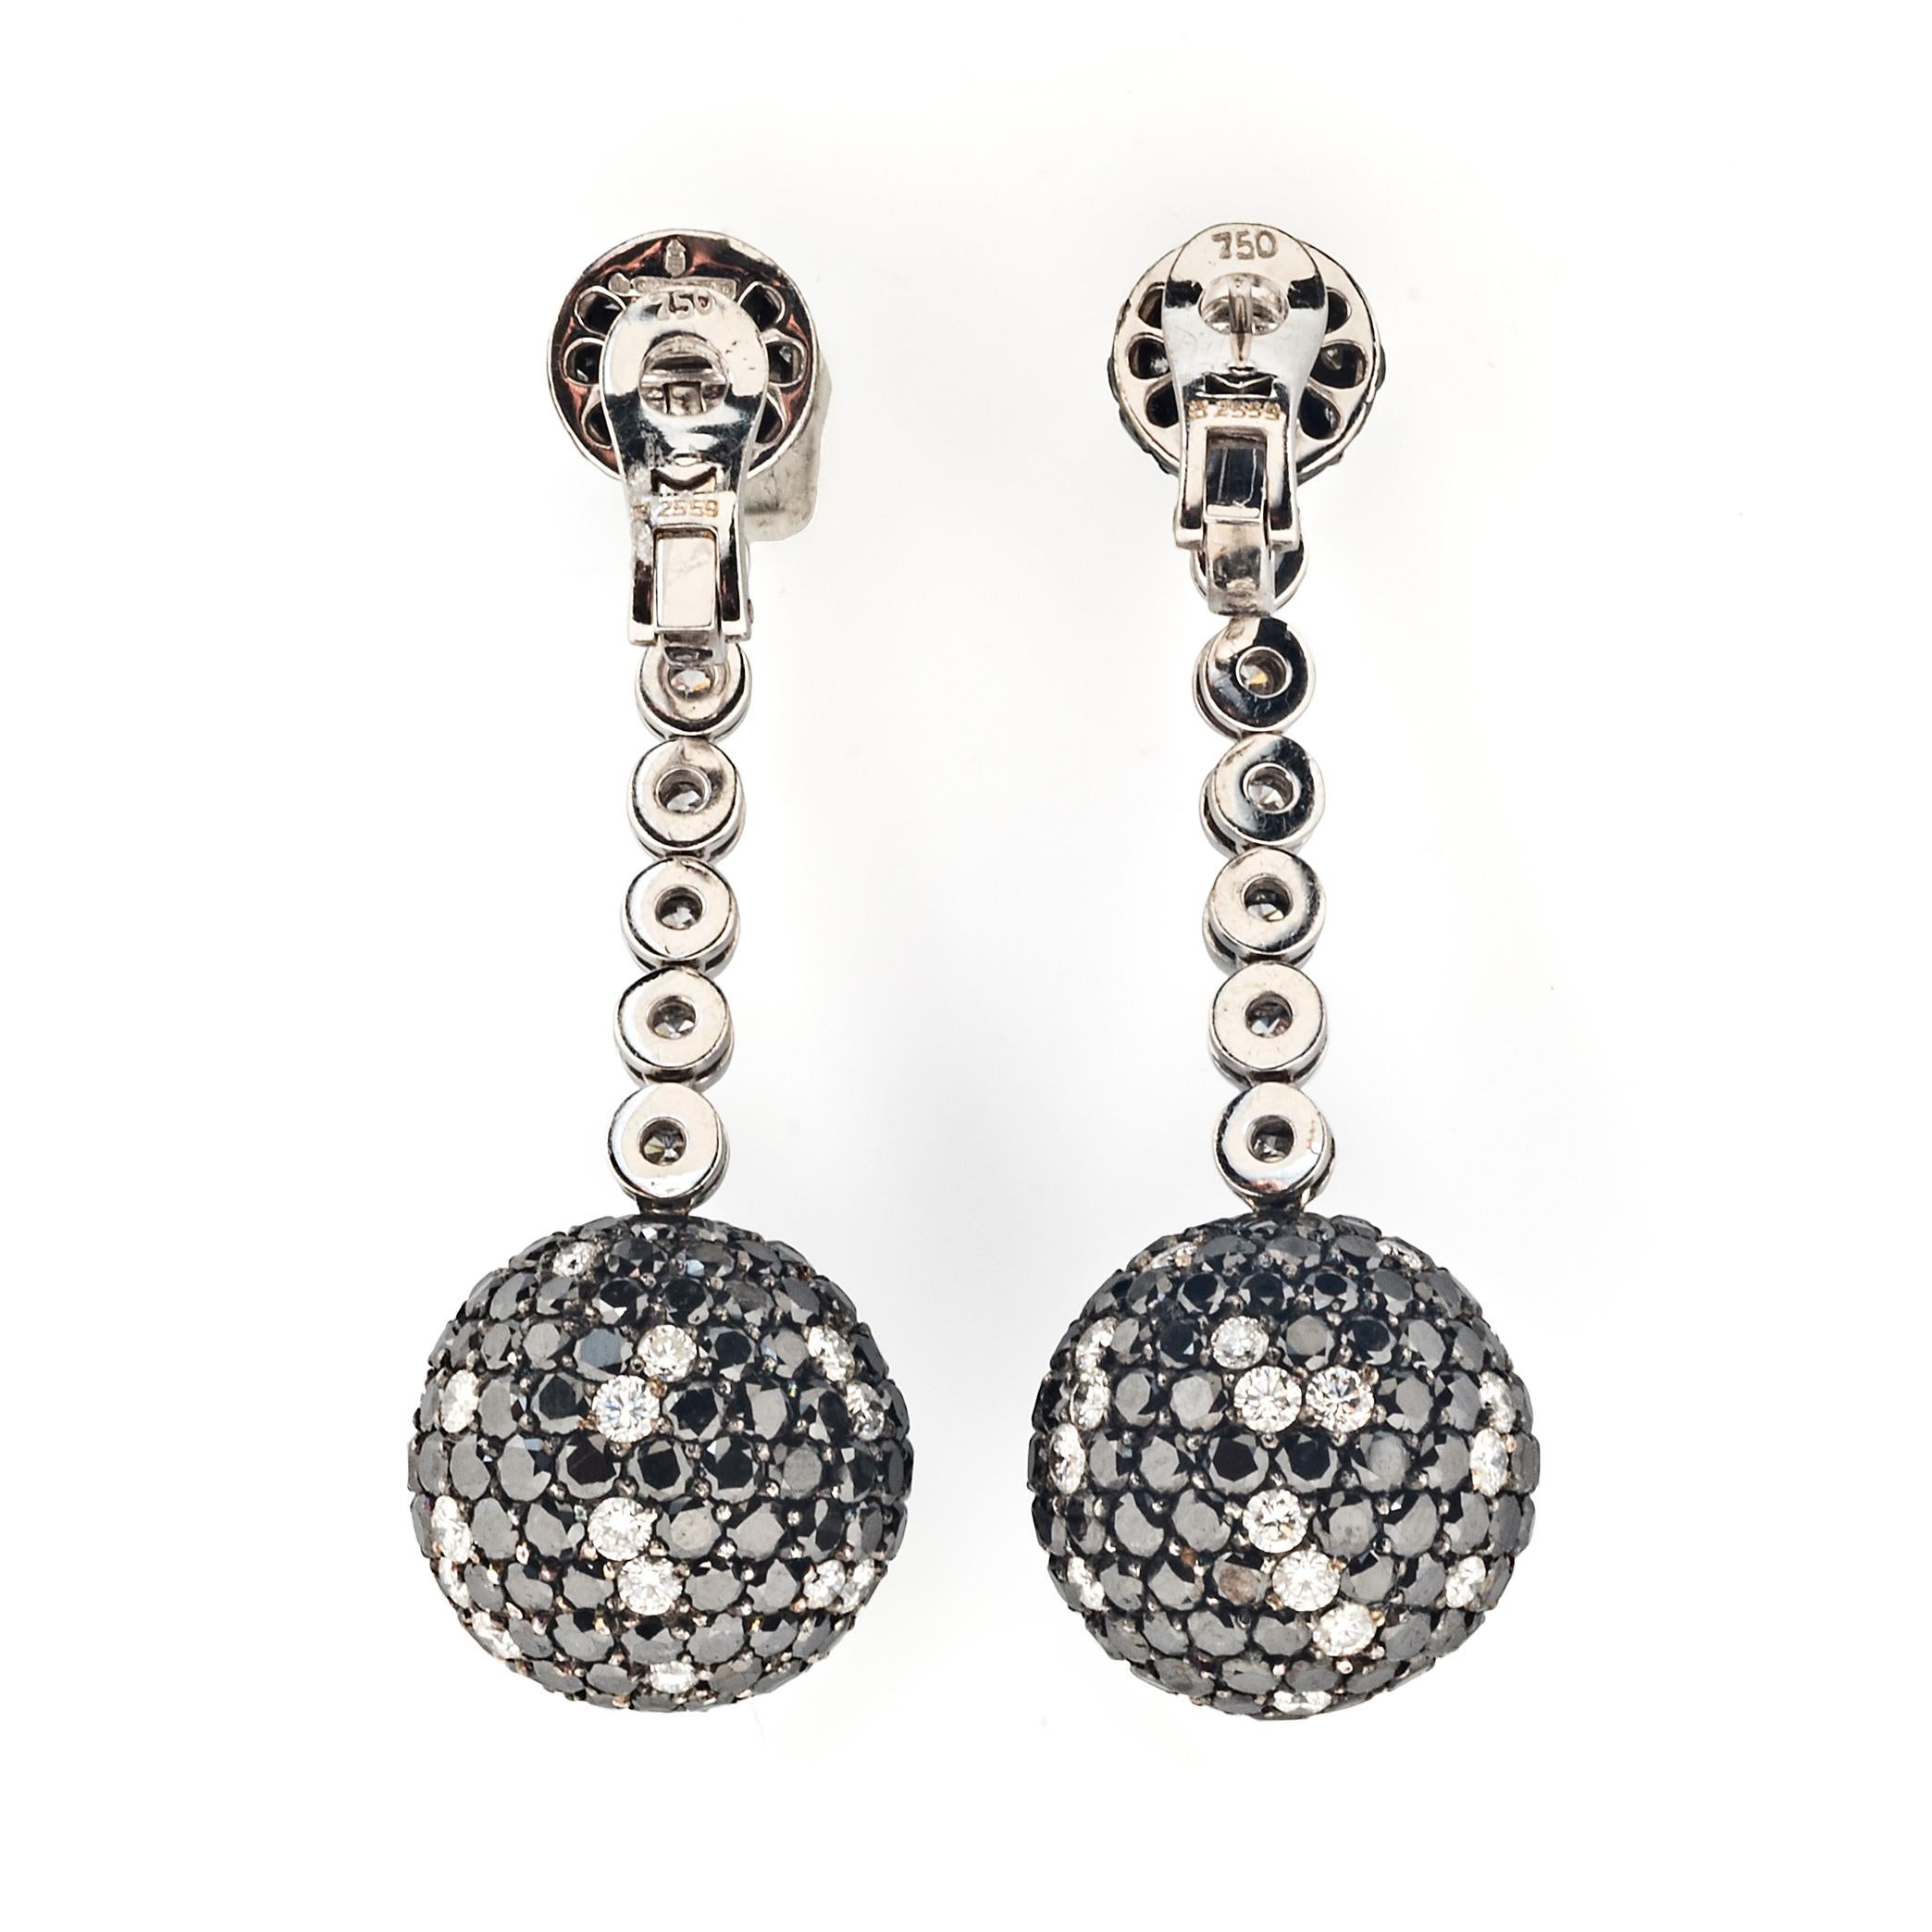 Inspired by the glamour of jet-set parties, the Boule collection is one of de Grisogono’s signature creations. This statement pair of earrings was made to order and sparkles with approximately 25.1 carats of black diamonds and approximately 3.0